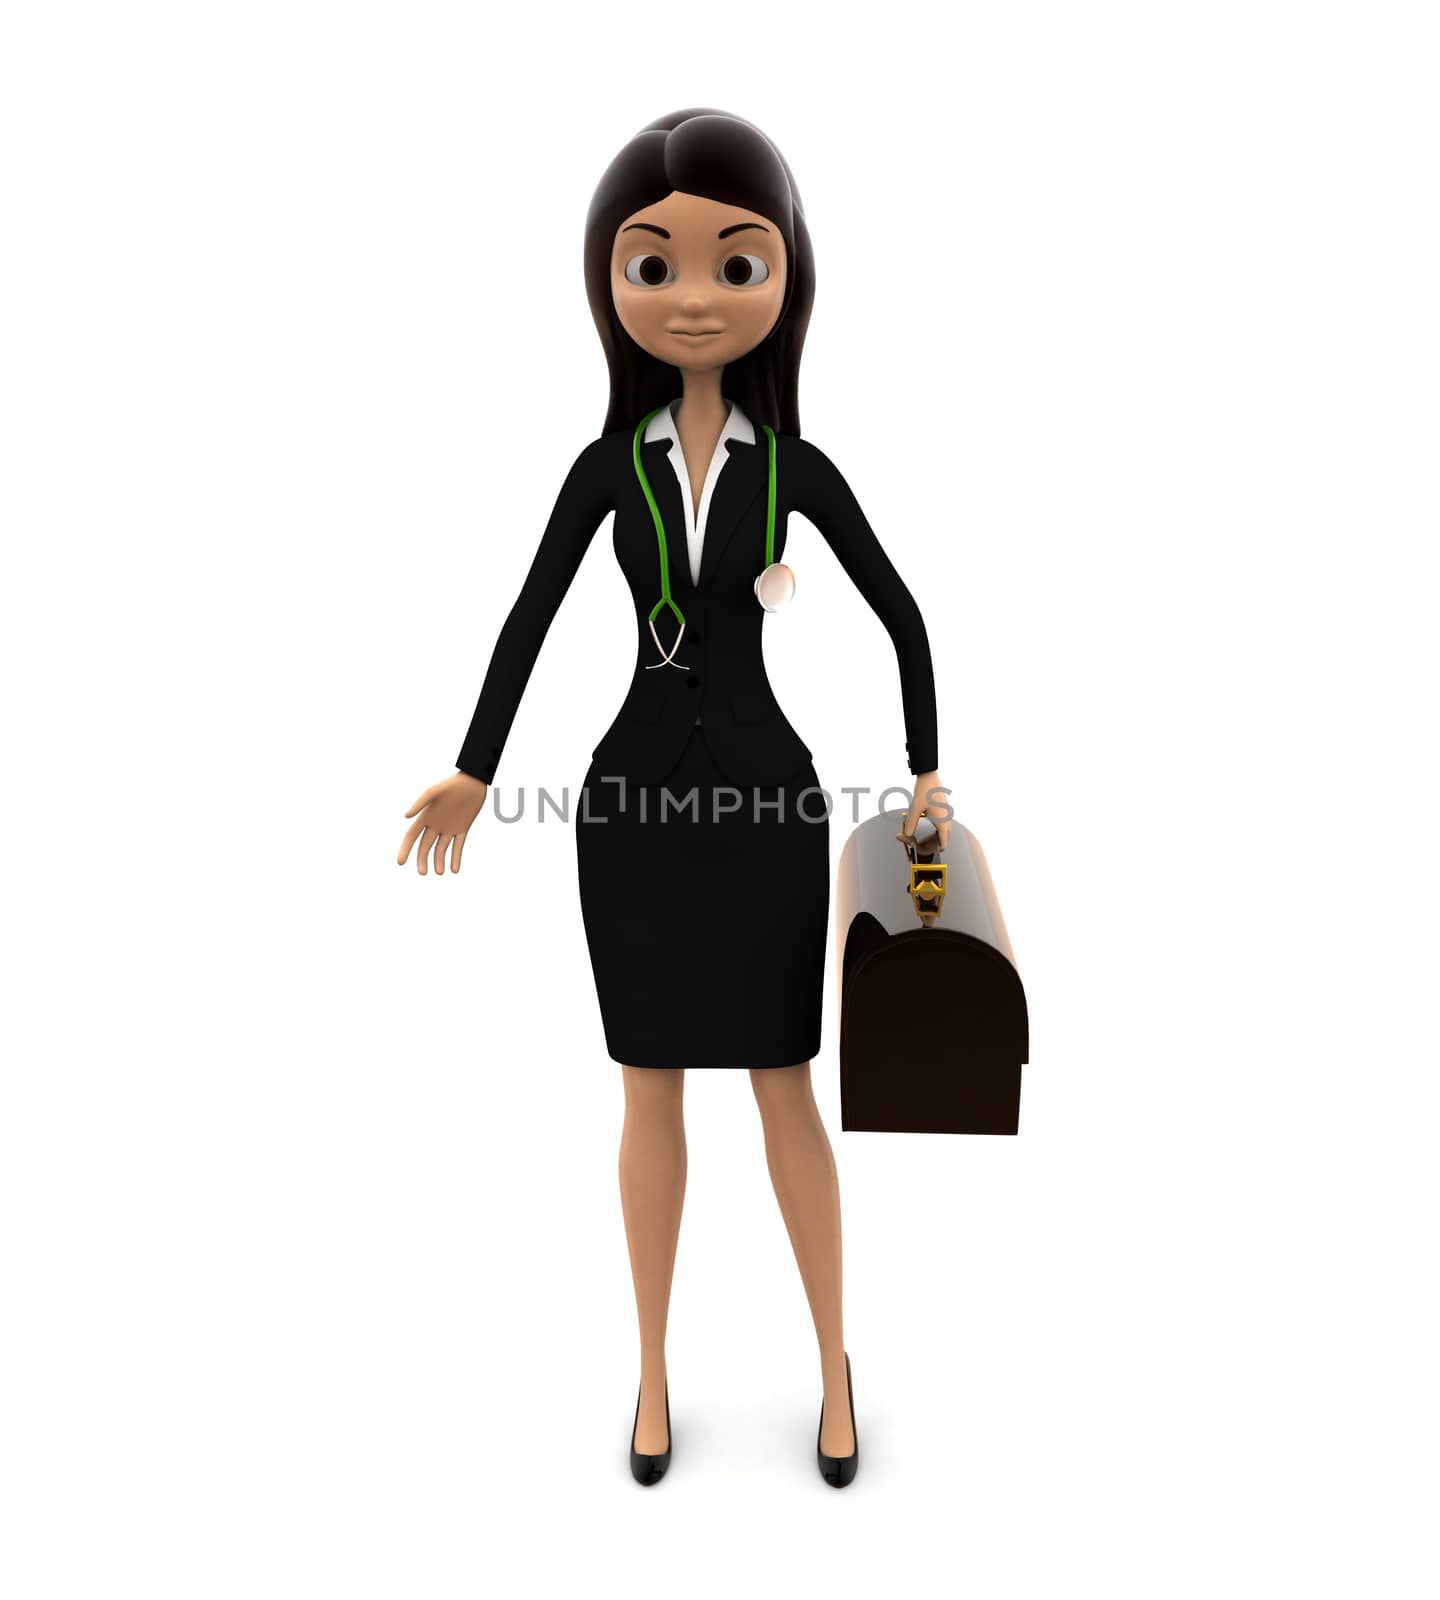 3d woman stanidng with brown bag and strethoscope on neck concept by touchmenithin@gmail.com